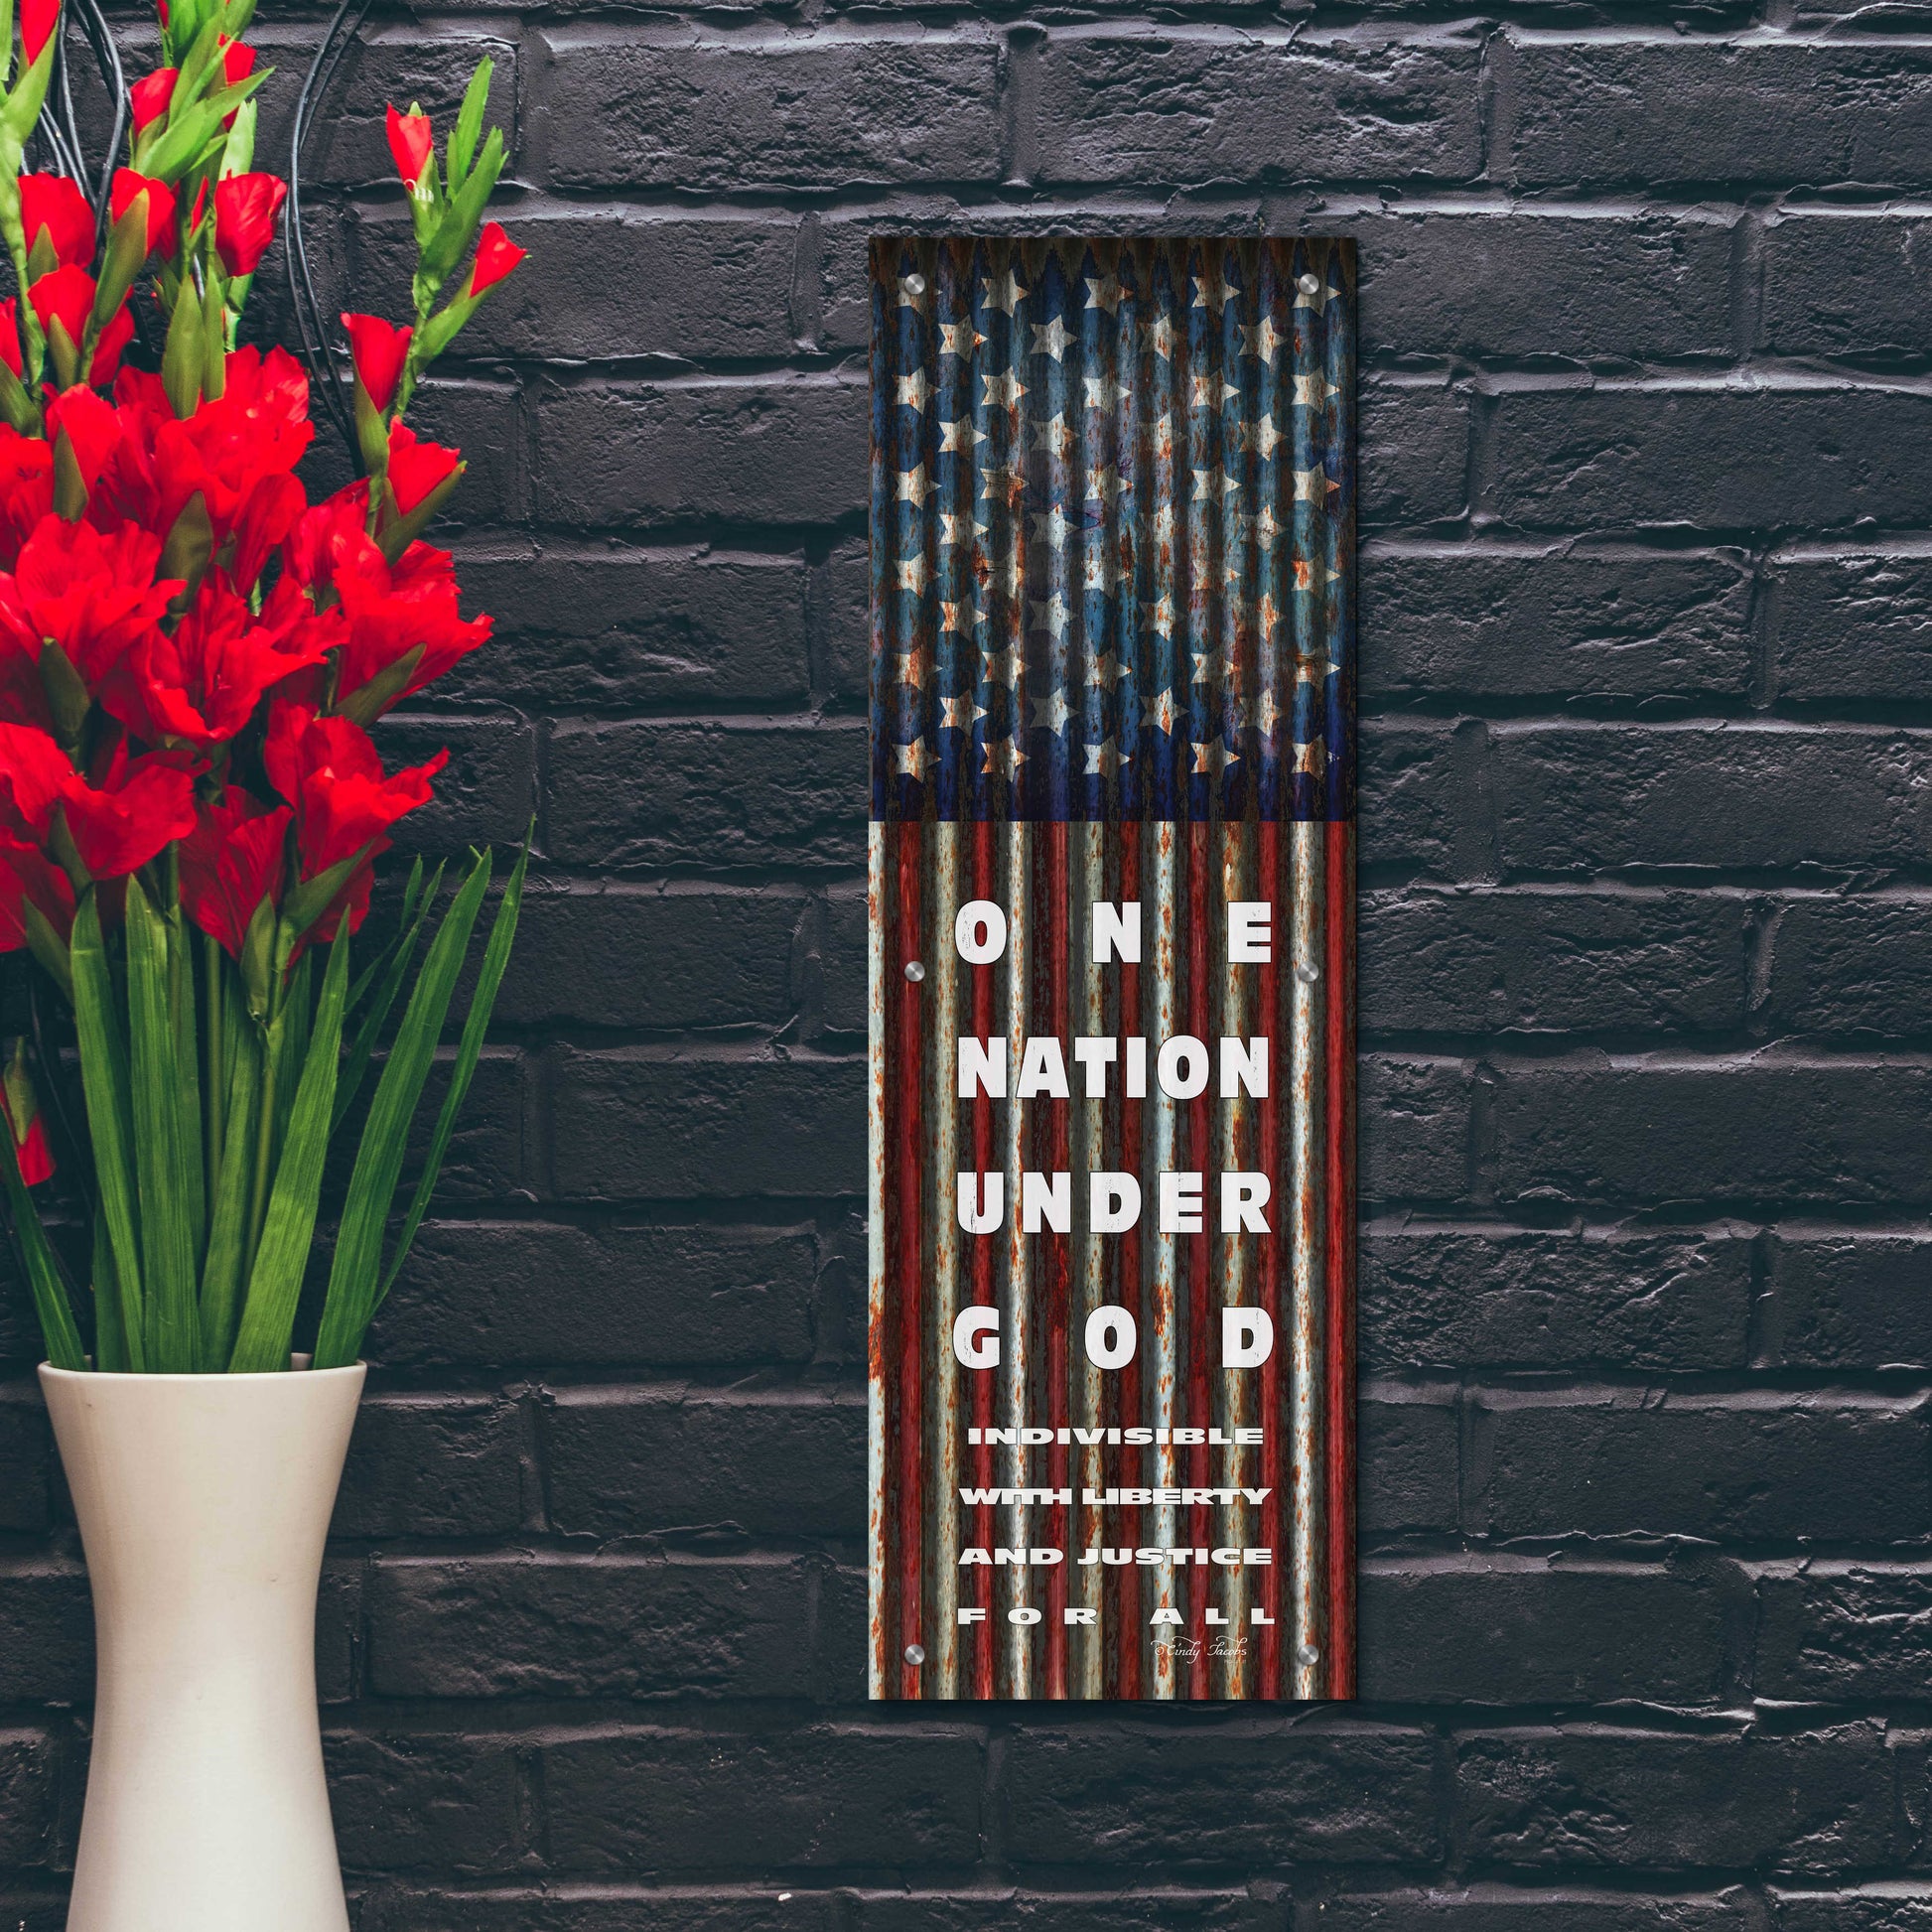 Epic Art 'One Nation Under God' by Cindy Jacobs, Acrylic Glass Wall Art,12x36